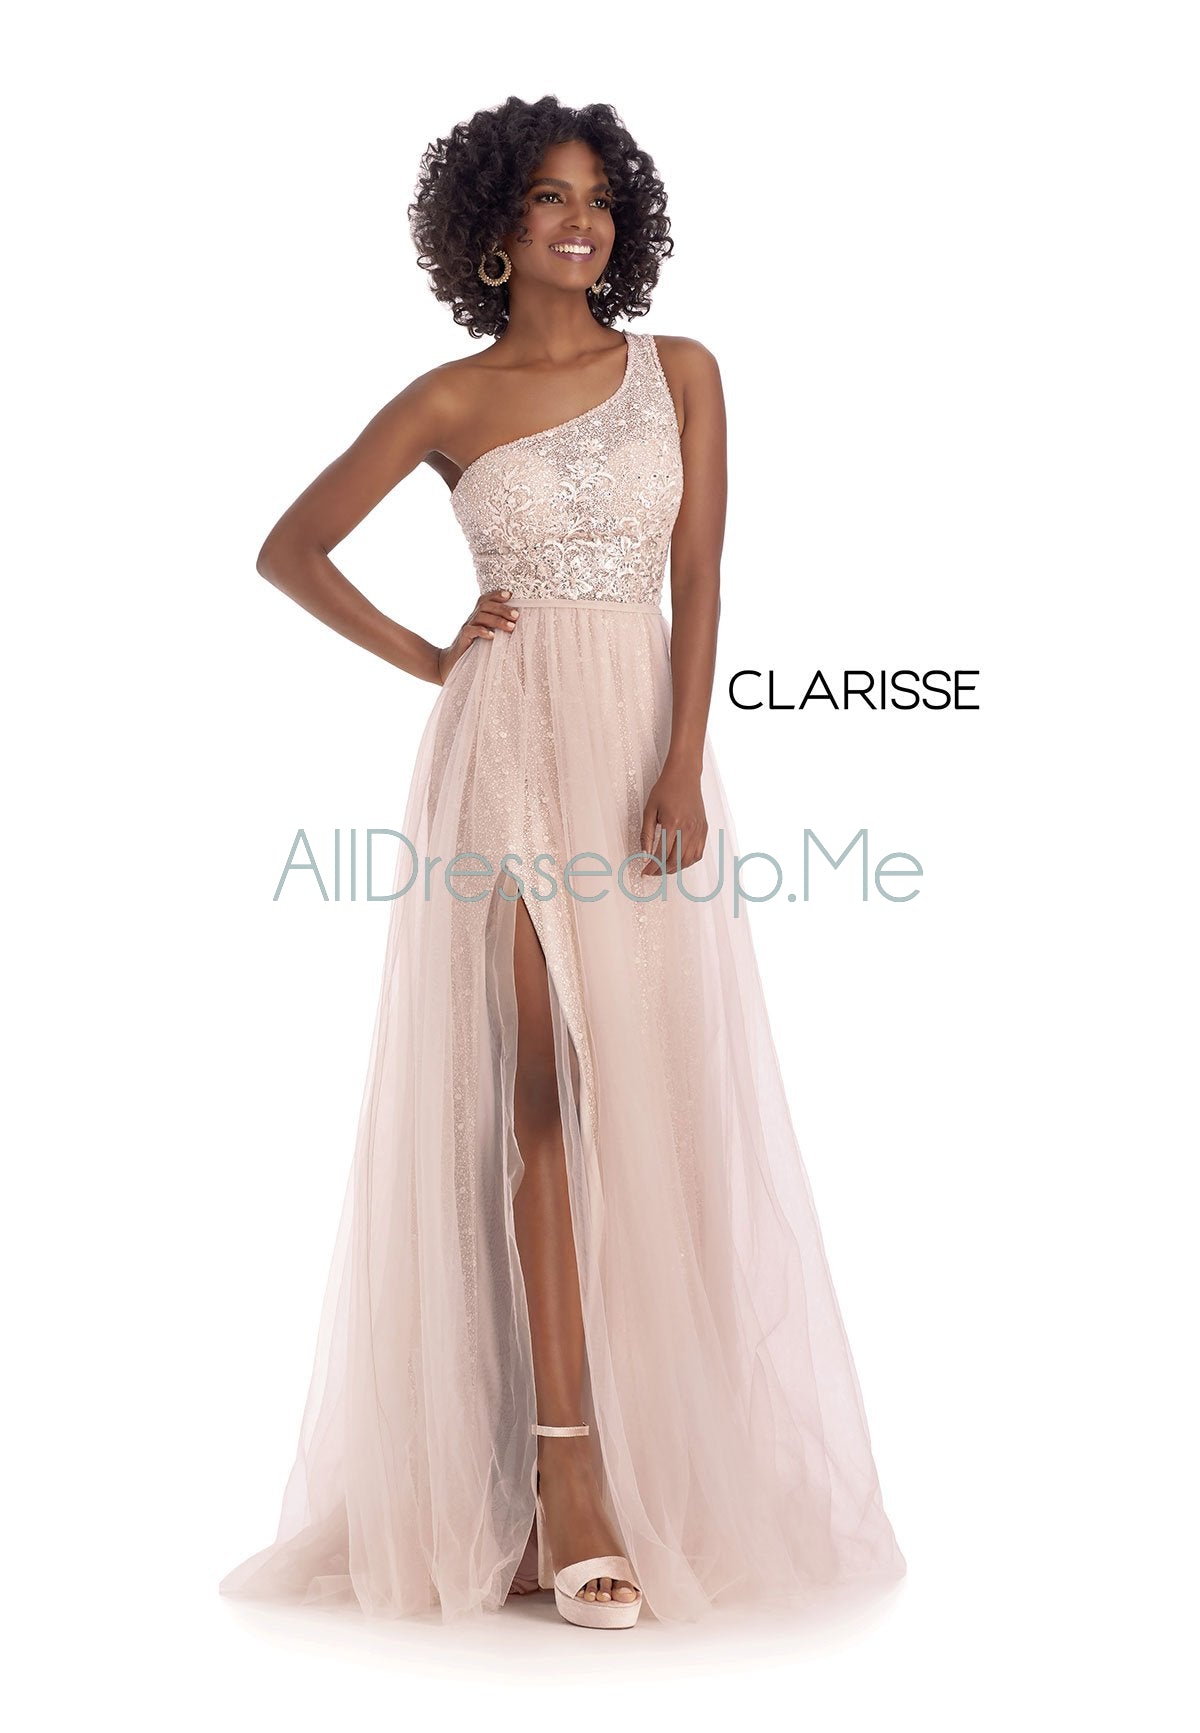 Last Dress In Store; Size: 6 Color: Dusty Rose | Clarisse Couture - 5118 - 6 - Dresses Two Piece Cut Out Sweetheart Halter Low Back High Neck Print Beaded Chiffon Jersey Fitted Sexy Satin Lace Jeweled Sparkle Shimmer Sleeveless Stunning Gorgeous Modest See Through Transparent Glitter Special Occasions Event Chattanooga Hixson Shops Boutiques Tennessee TN Georgia GA MSRP Lowest Prices Sale Discount